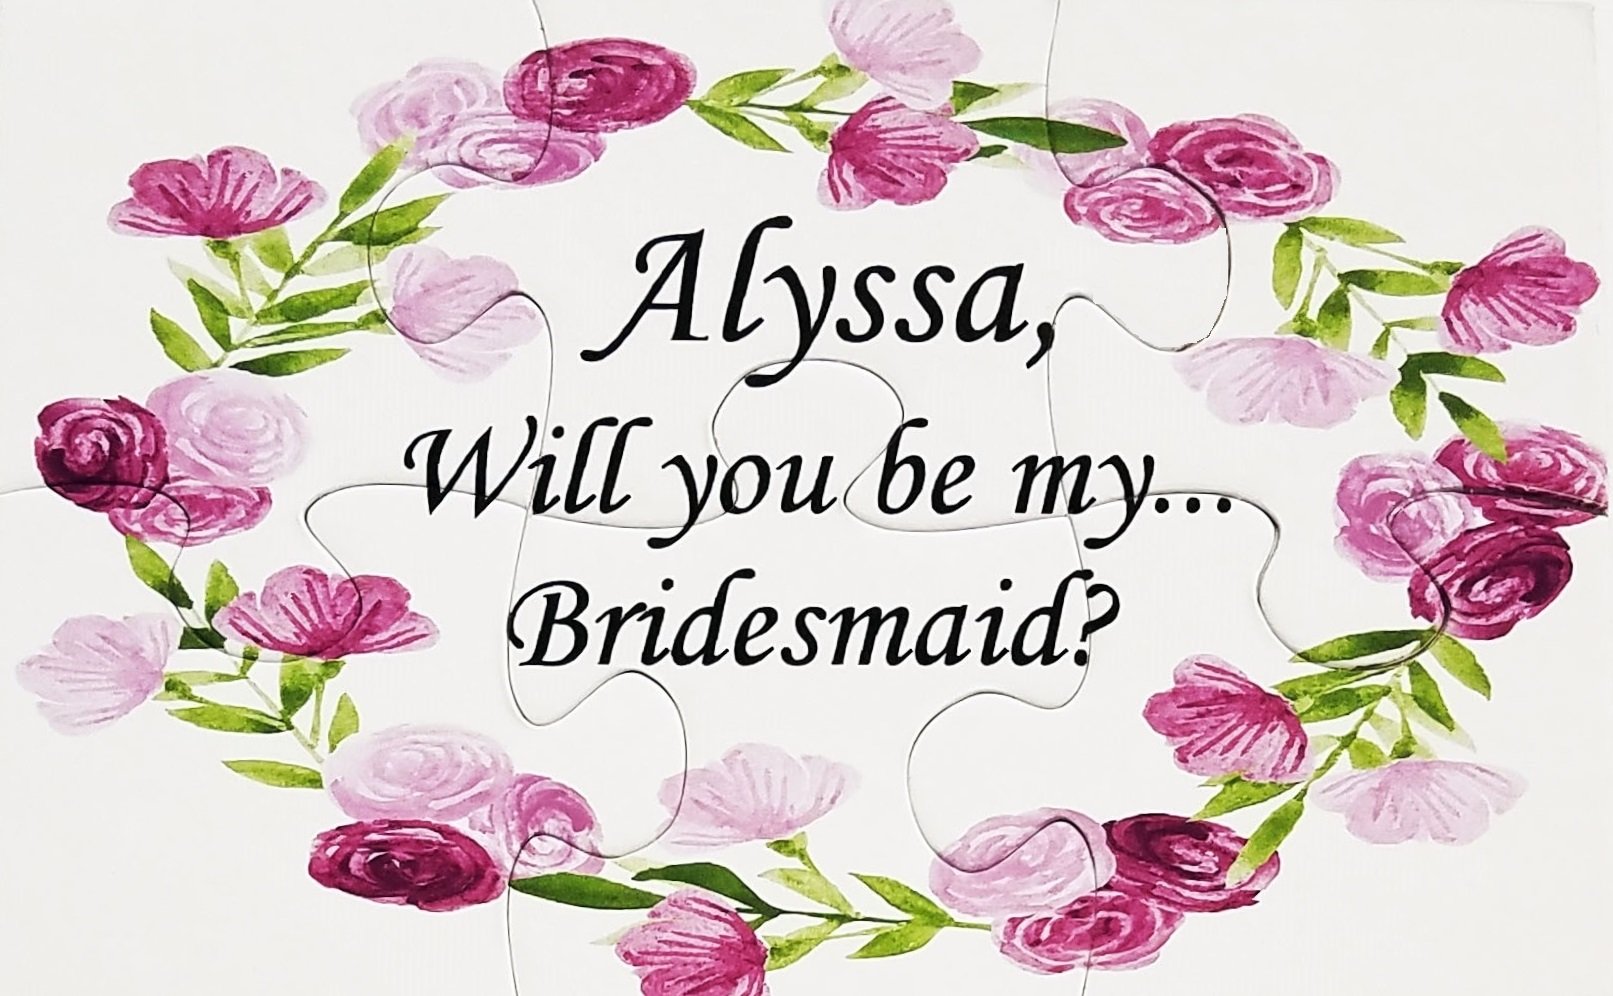 Will You Be My Bridesmaid Jigsaw Puzzle.  Ask Flower Girl With A Keepsake The Missing Piece Puzzle Company